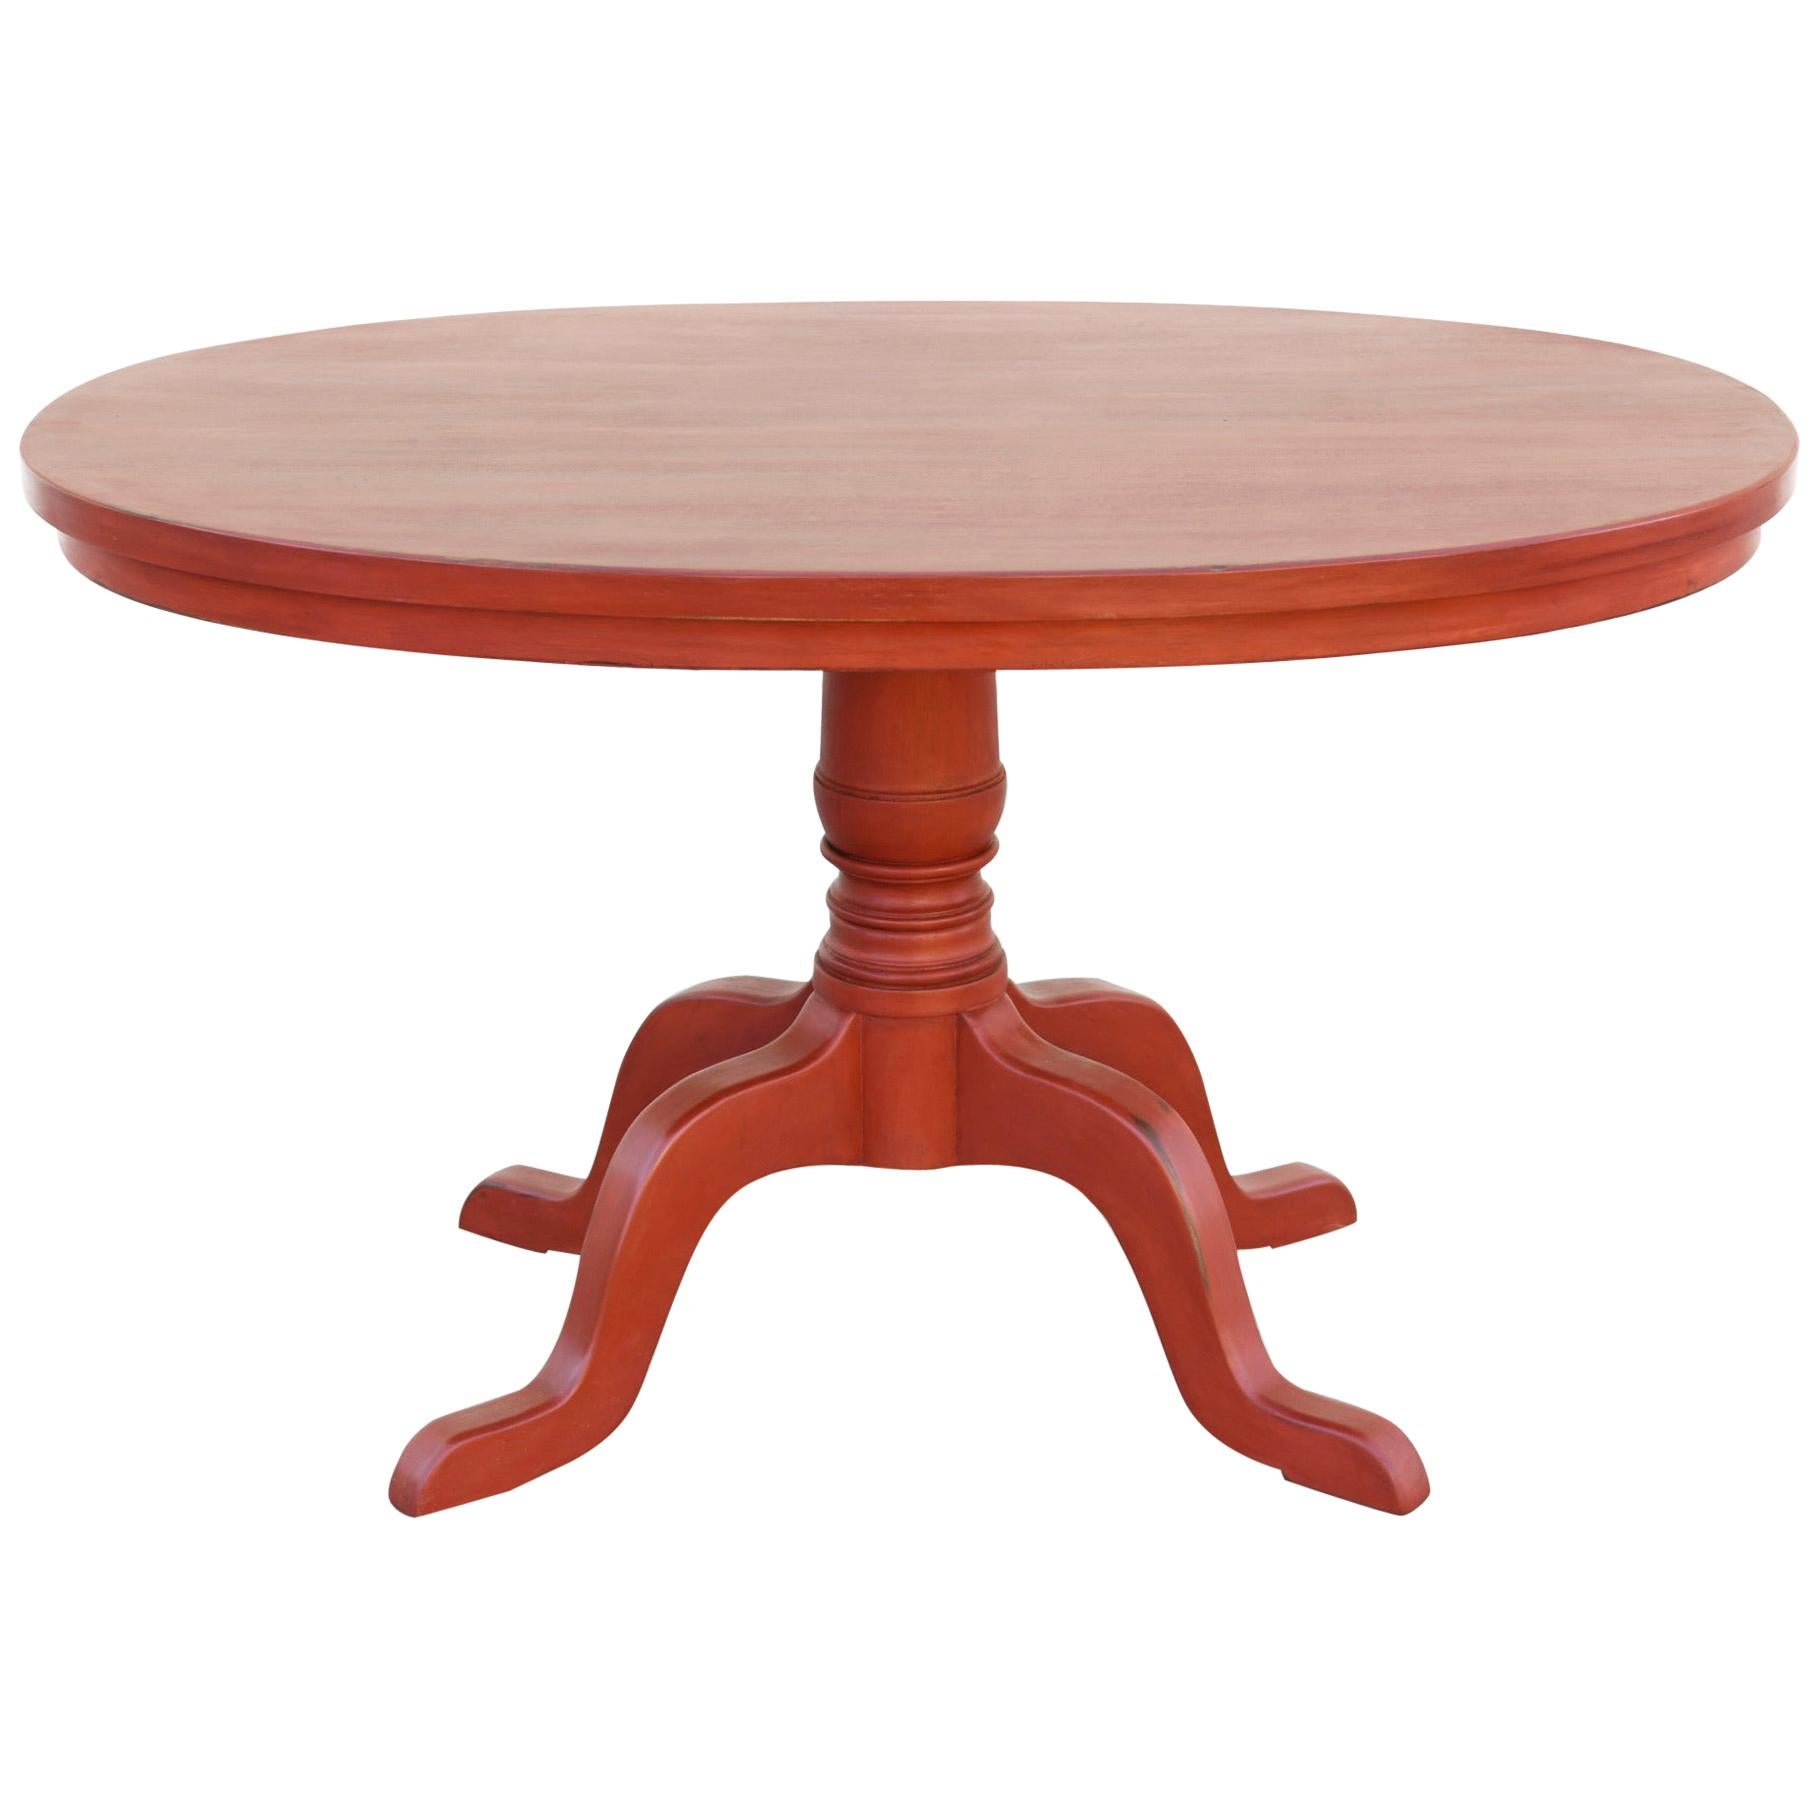 Custom Orange Painted Pedestal Table, Made to Order by Petersen Antiques